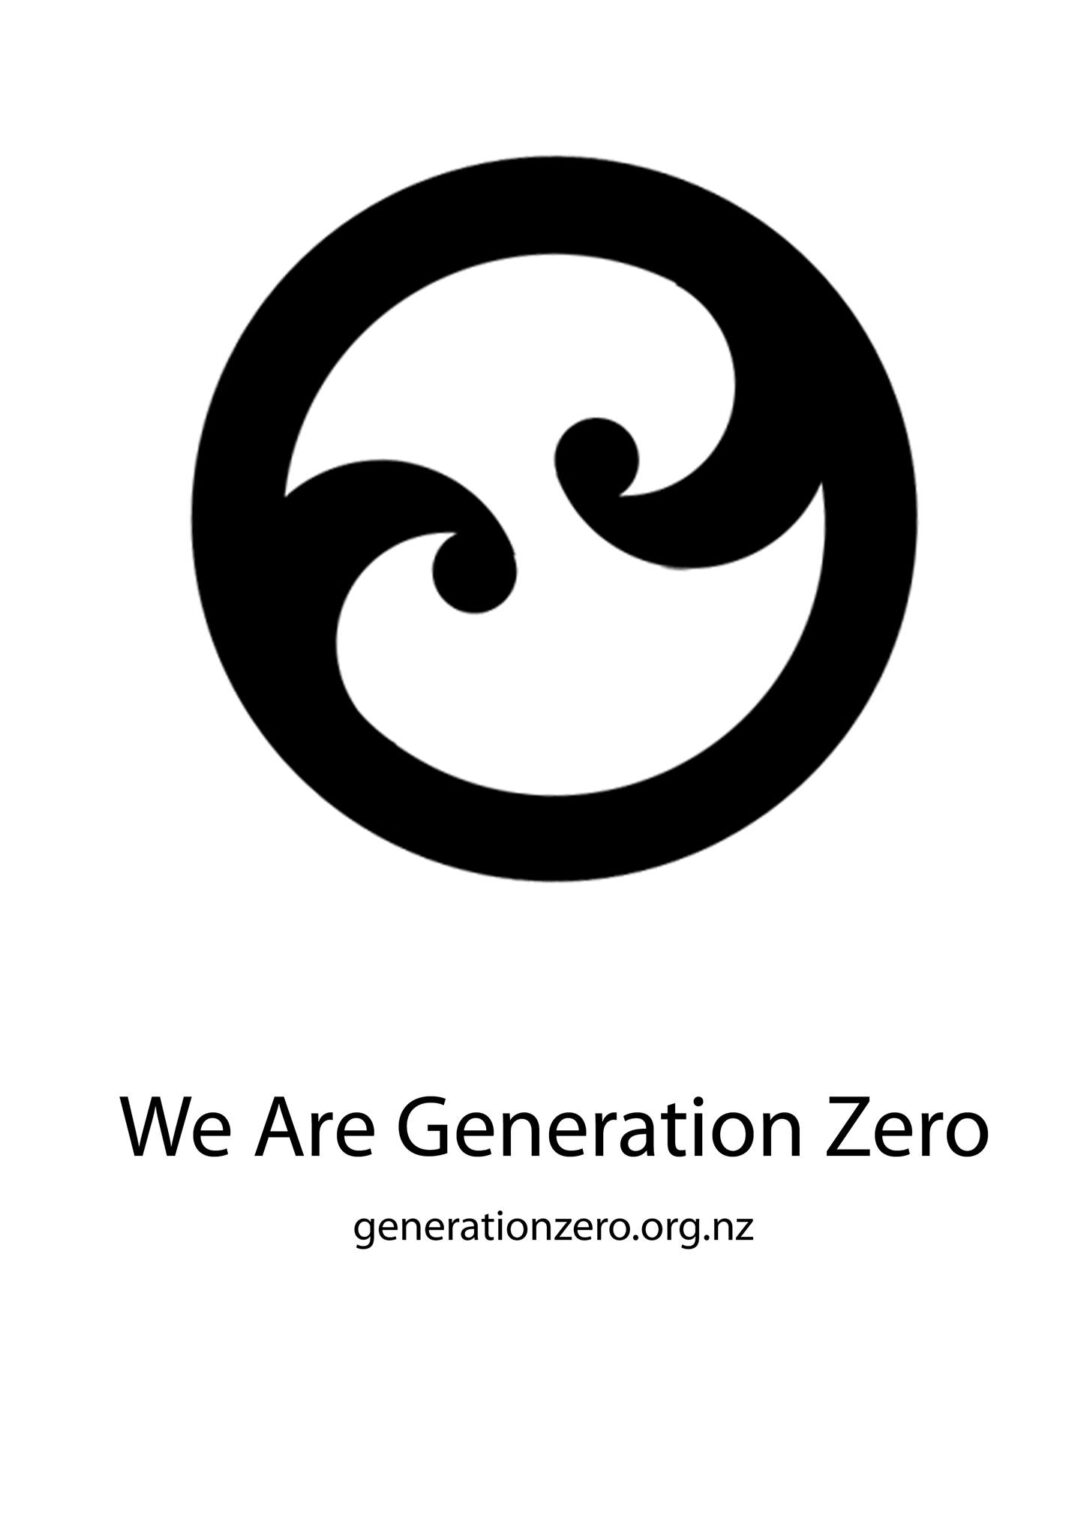 Generation Zero public meeting with Christchurch Central candidates